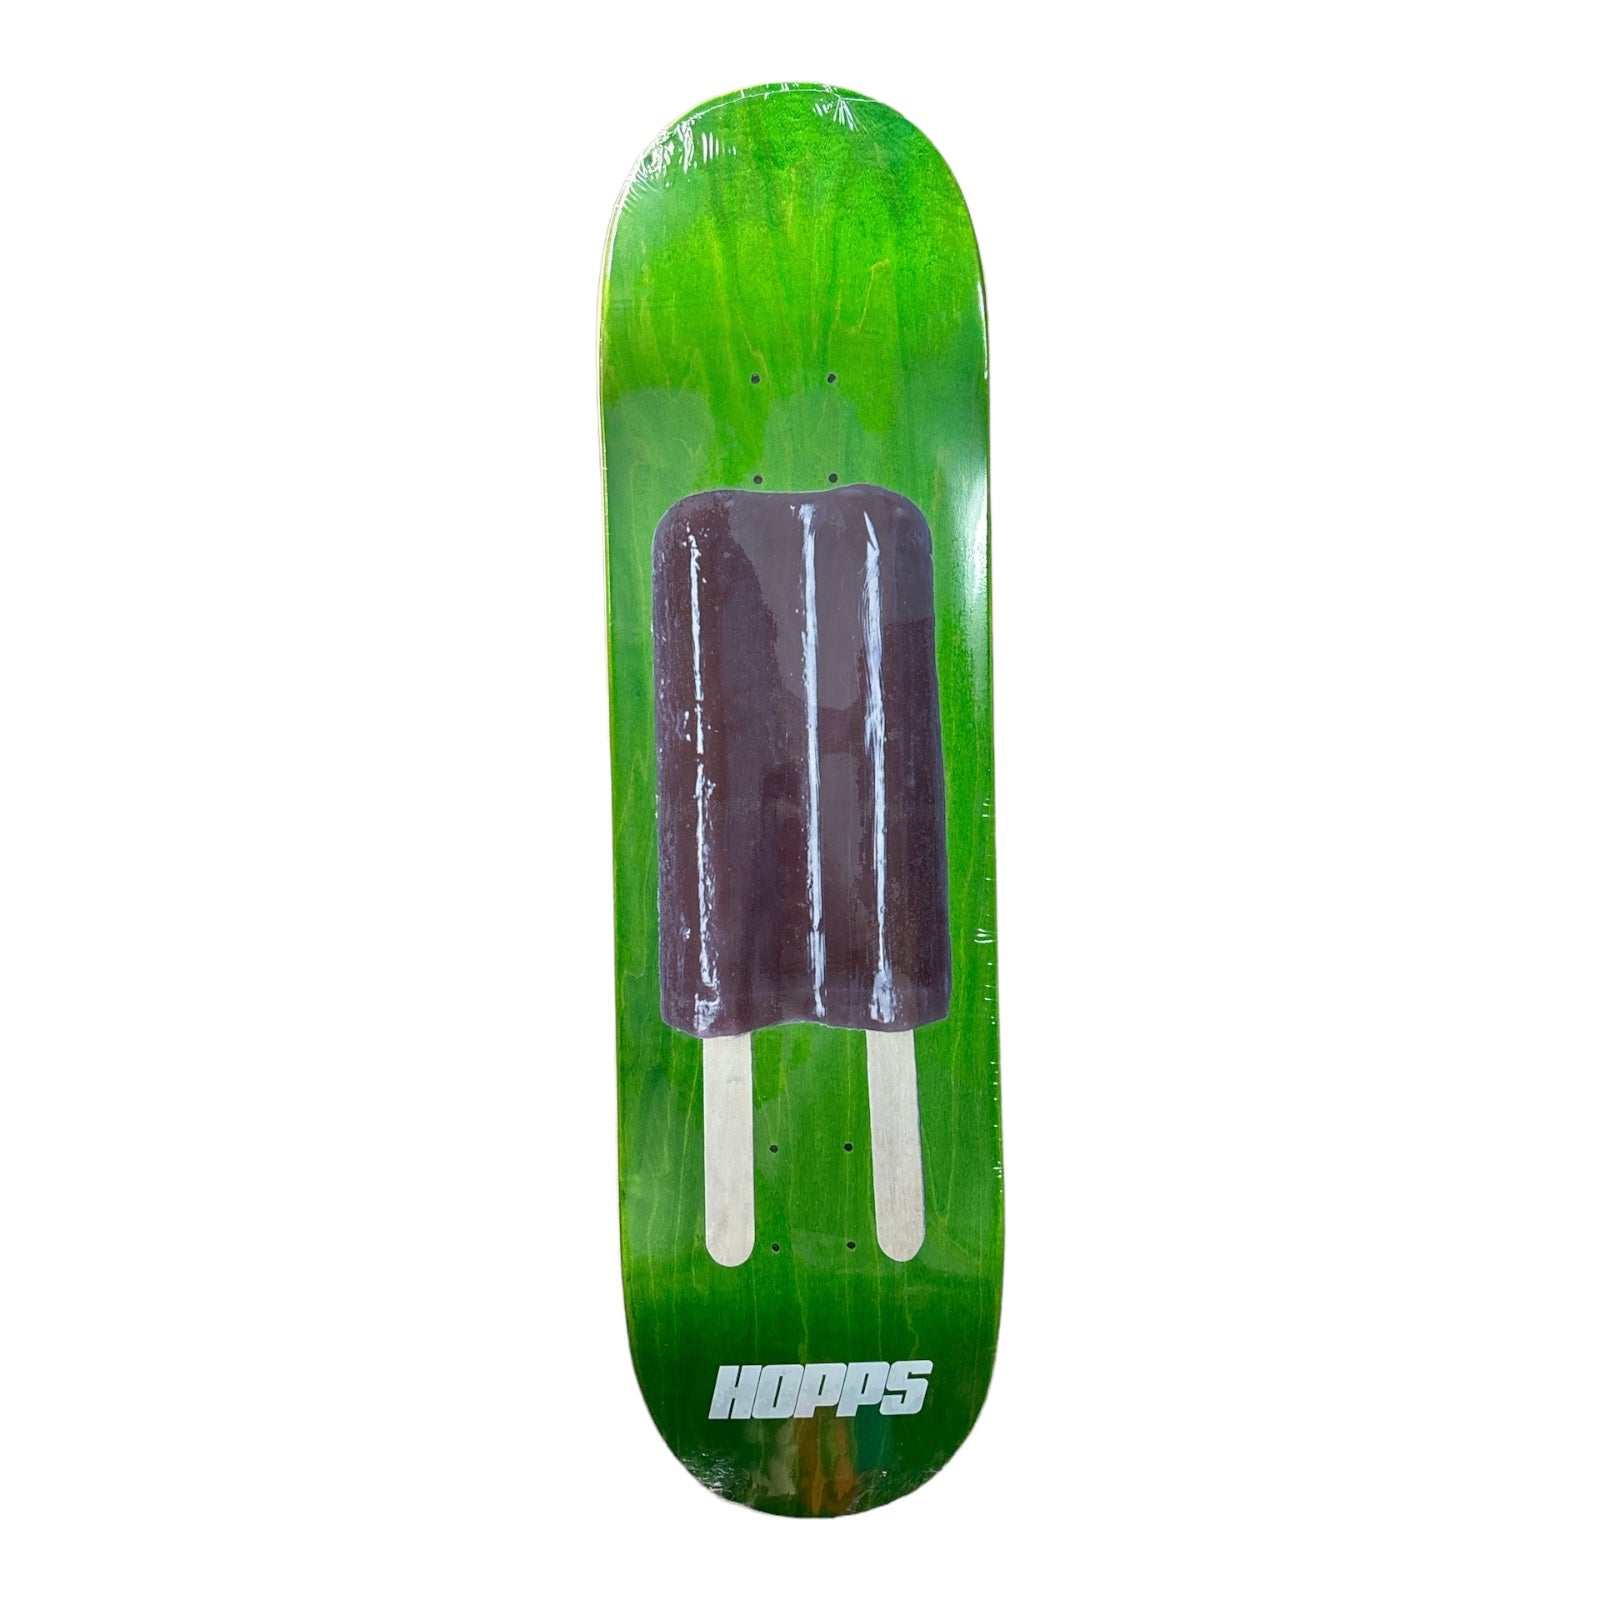 Skateboard deck with picture of grape popsicle 